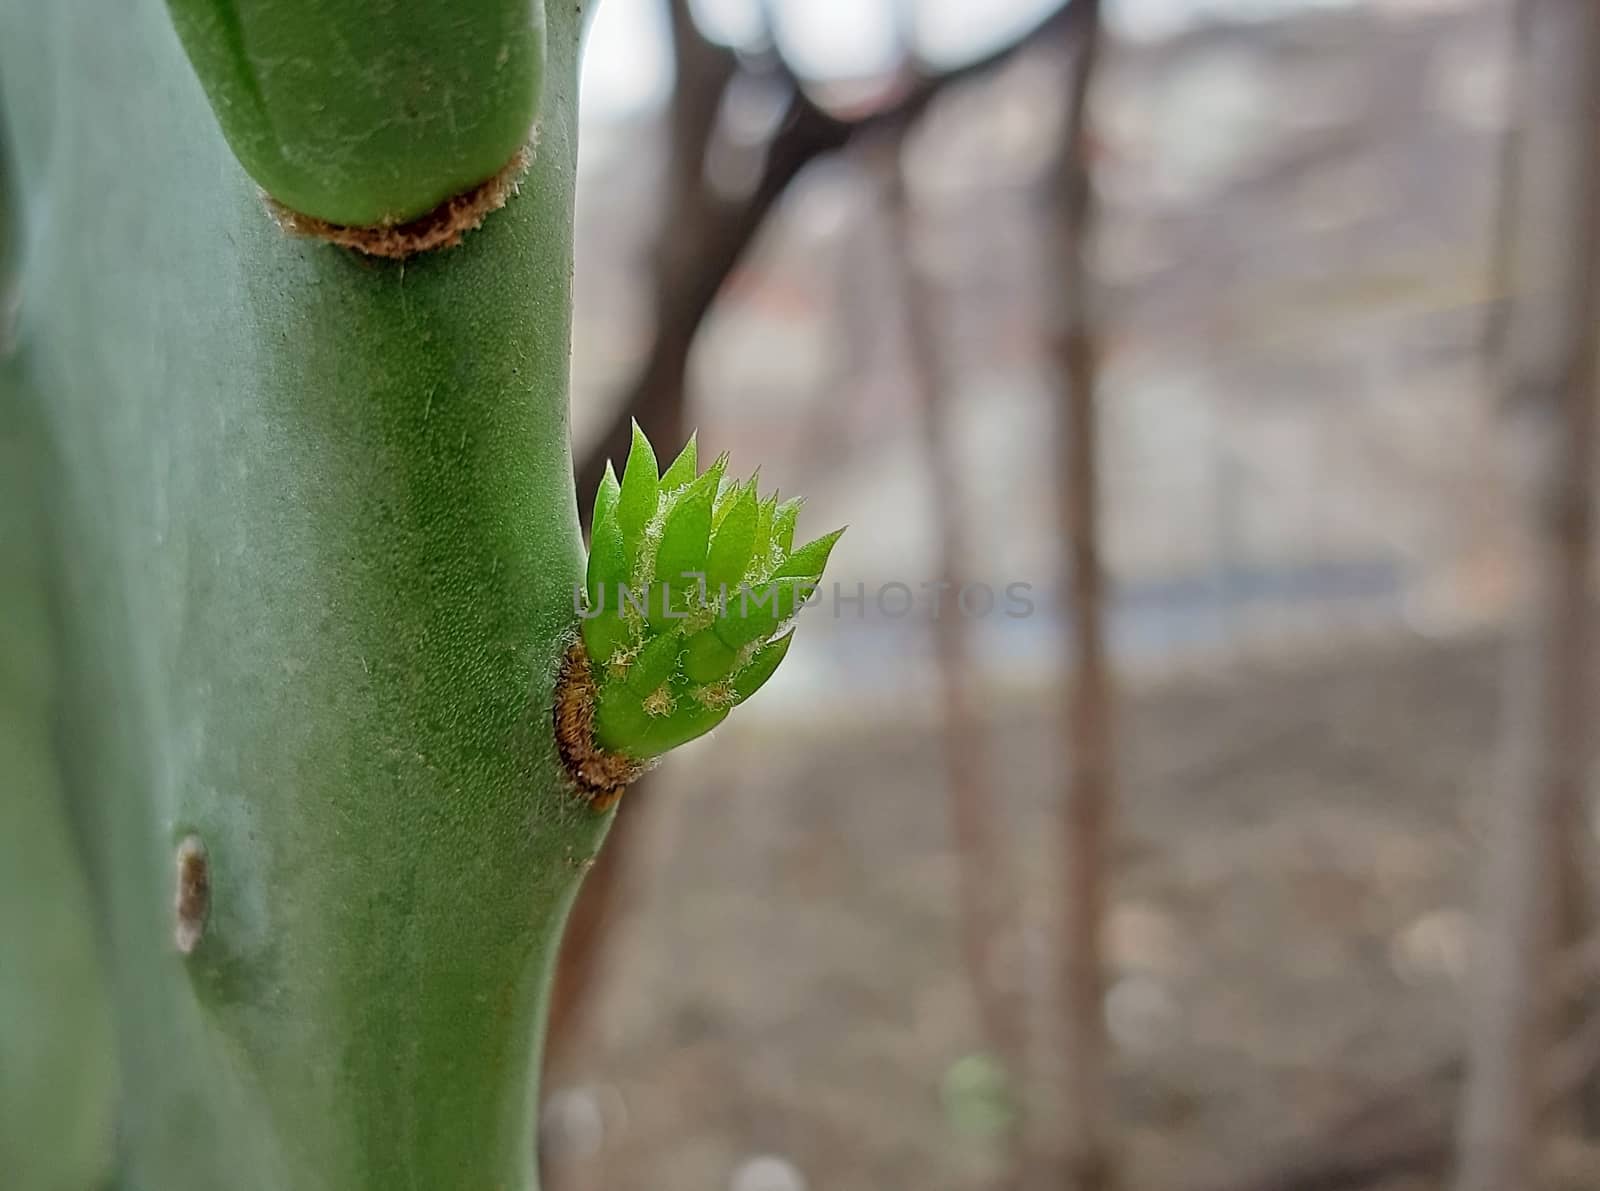 Opuntia cactus new growth in spring close up by Mindru